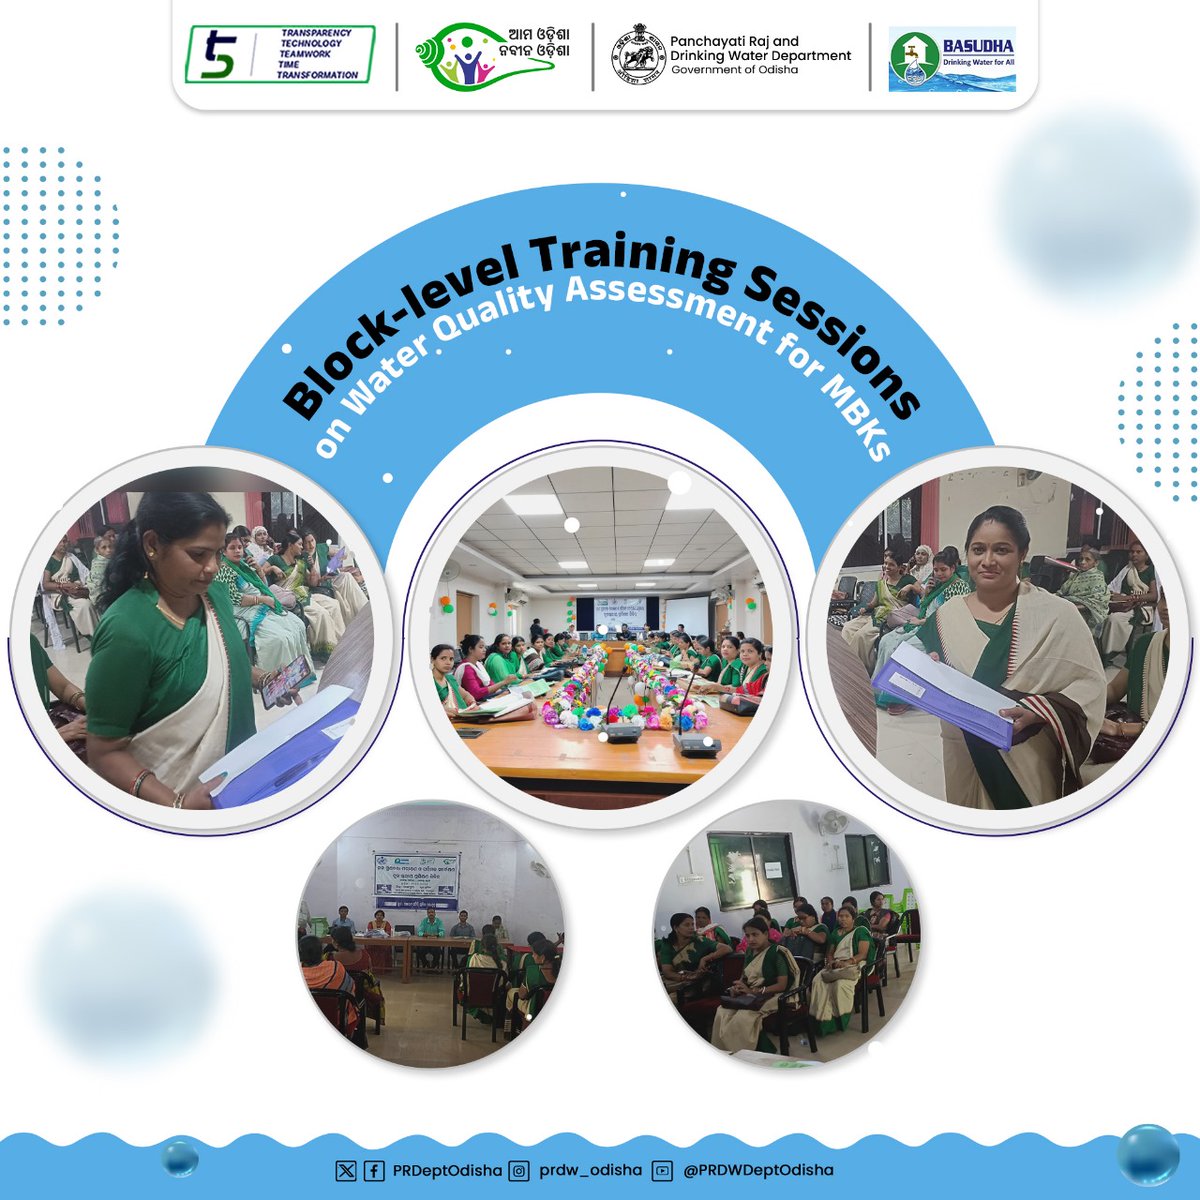 Block-level training on water quality assessment using #FieldTestingKits for Master Book Keepers are being organised in various districts across #Odisha. This proactive initiative aims to bolster community well-being & raise public awareness.
#OdishaCares
#DrinkingWaterforAll